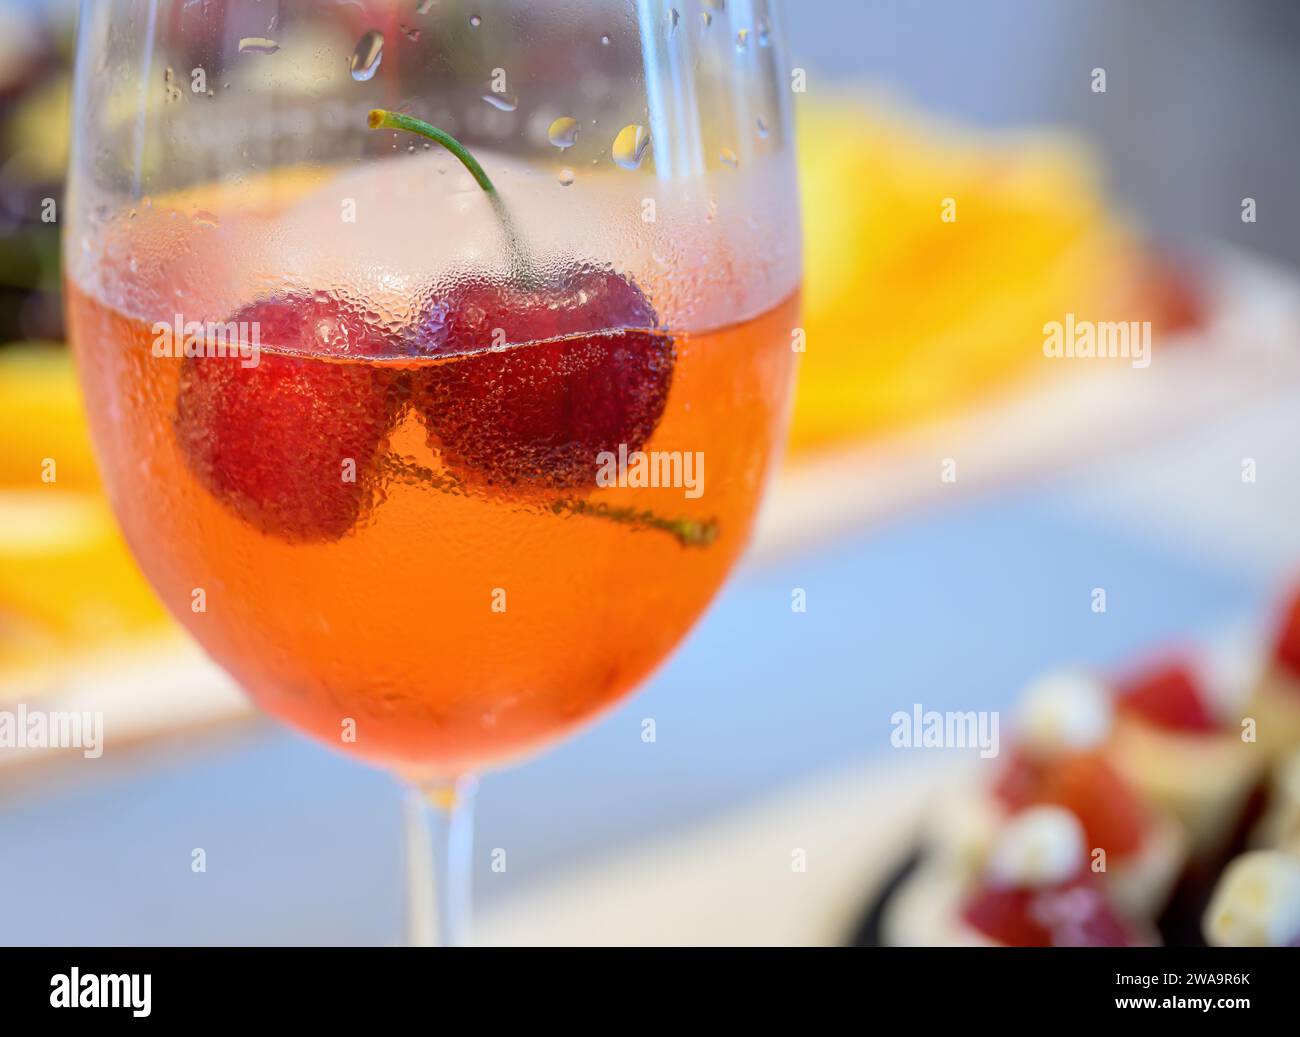 Ice cold fresh cocktail drinks with cherries. Glass covered with water drops condensation. Out-of-focus dessert background. Stock Photo